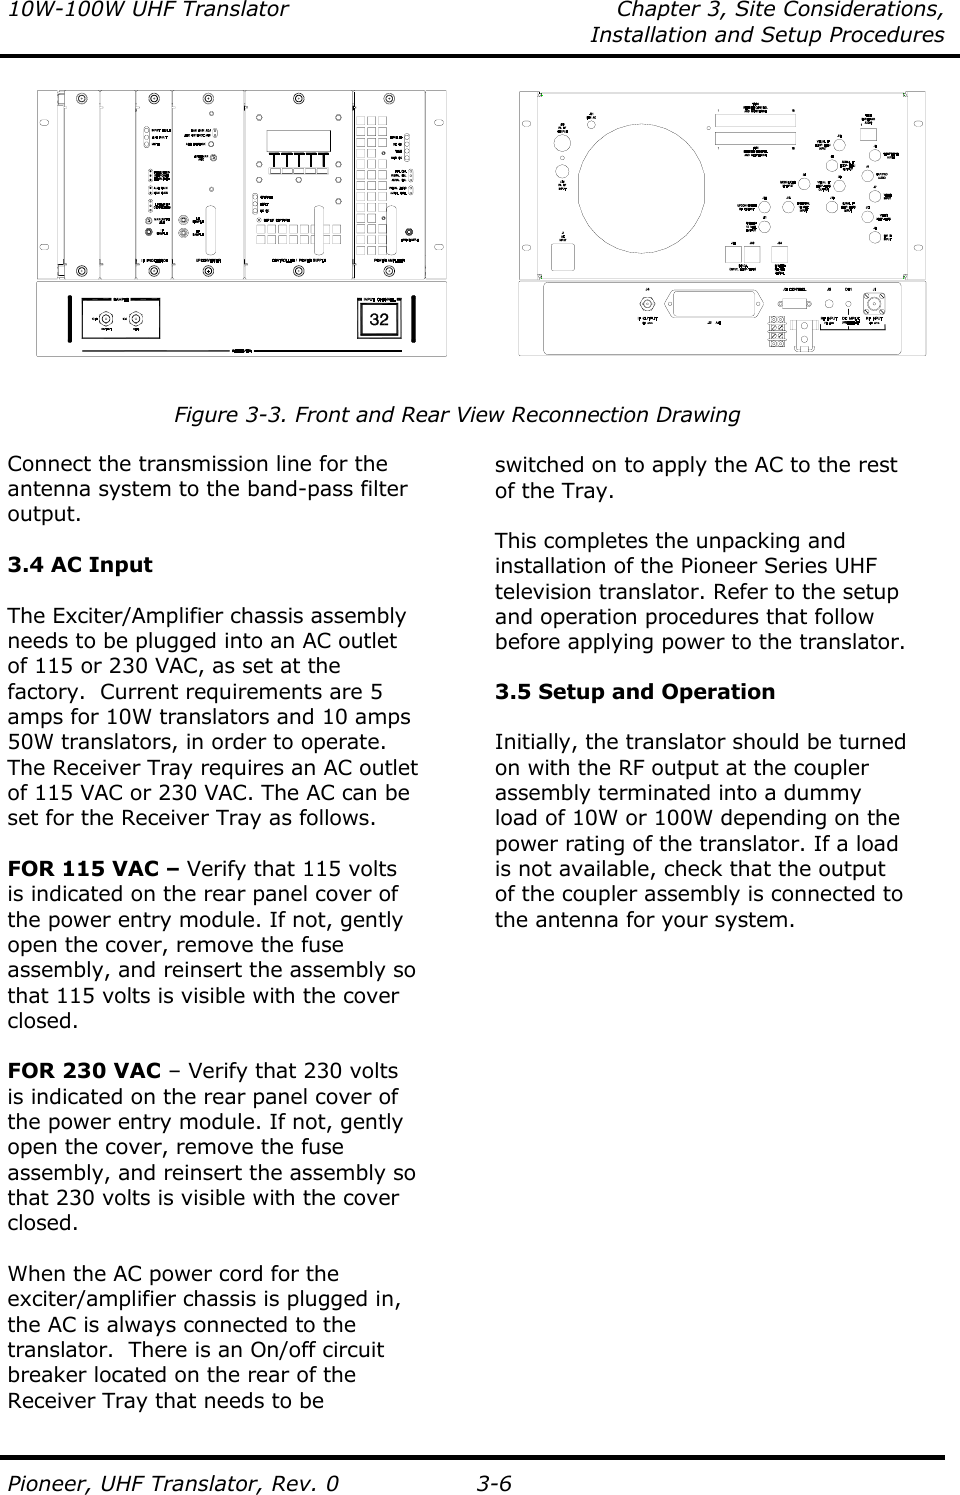 10W-100W UHF Translator  Chapter 3, Site Considerations,    Installation and Setup Procedures  Pioneer, UHF Translator, Rev. 0 3-6             Figure 3-3. Front and Rear View Reconnection Drawing  Connect the transmission line for the antenna system to the band-pass filter output.   3.4 AC Input  The Exciter/Amplifier chassis assembly needs to be plugged into an AC outlet of 115 or 230 VAC, as set at the factory.  Current requirements are 5 amps for 10W translators and 10 amps 50W translators, in order to operate.  The Receiver Tray requires an AC outlet of 115 VAC or 230 VAC. The AC can be set for the Receiver Tray as follows.  FOR 115 VAC – Verify that 115 volts is indicated on the rear panel cover of the power entry module. If not, gently open the cover, remove the fuse assembly, and reinsert the assembly so that 115 volts is visible with the cover closed.  FOR 230 VAC – Verify that 230 volts is indicated on the rear panel cover of the power entry module. If not, gently open the cover, remove the fuse assembly, and reinsert the assembly so that 230 volts is visible with the cover closed.  When the AC power cord for the exciter/amplifier chassis is plugged in, the AC is always connected to the translator.  There is an On/off circuit  breaker located on the rear of the  Receiver Tray that needs to be    switched on to apply the AC to the rest of the Tray.  This completes the unpacking and installation of the Pioneer Series UHF television translator. Refer to the setup and operation procedures that follow before applying power to the translator.  3.5 Setup and Operation  Initially, the translator should be turned on with the RF output at the coupler assembly terminated into a dummy load of 10W or 100W depending on the power rating of the translator. If a load is not available, check that the output of the coupler assembly is connected to the antenna for your system. 